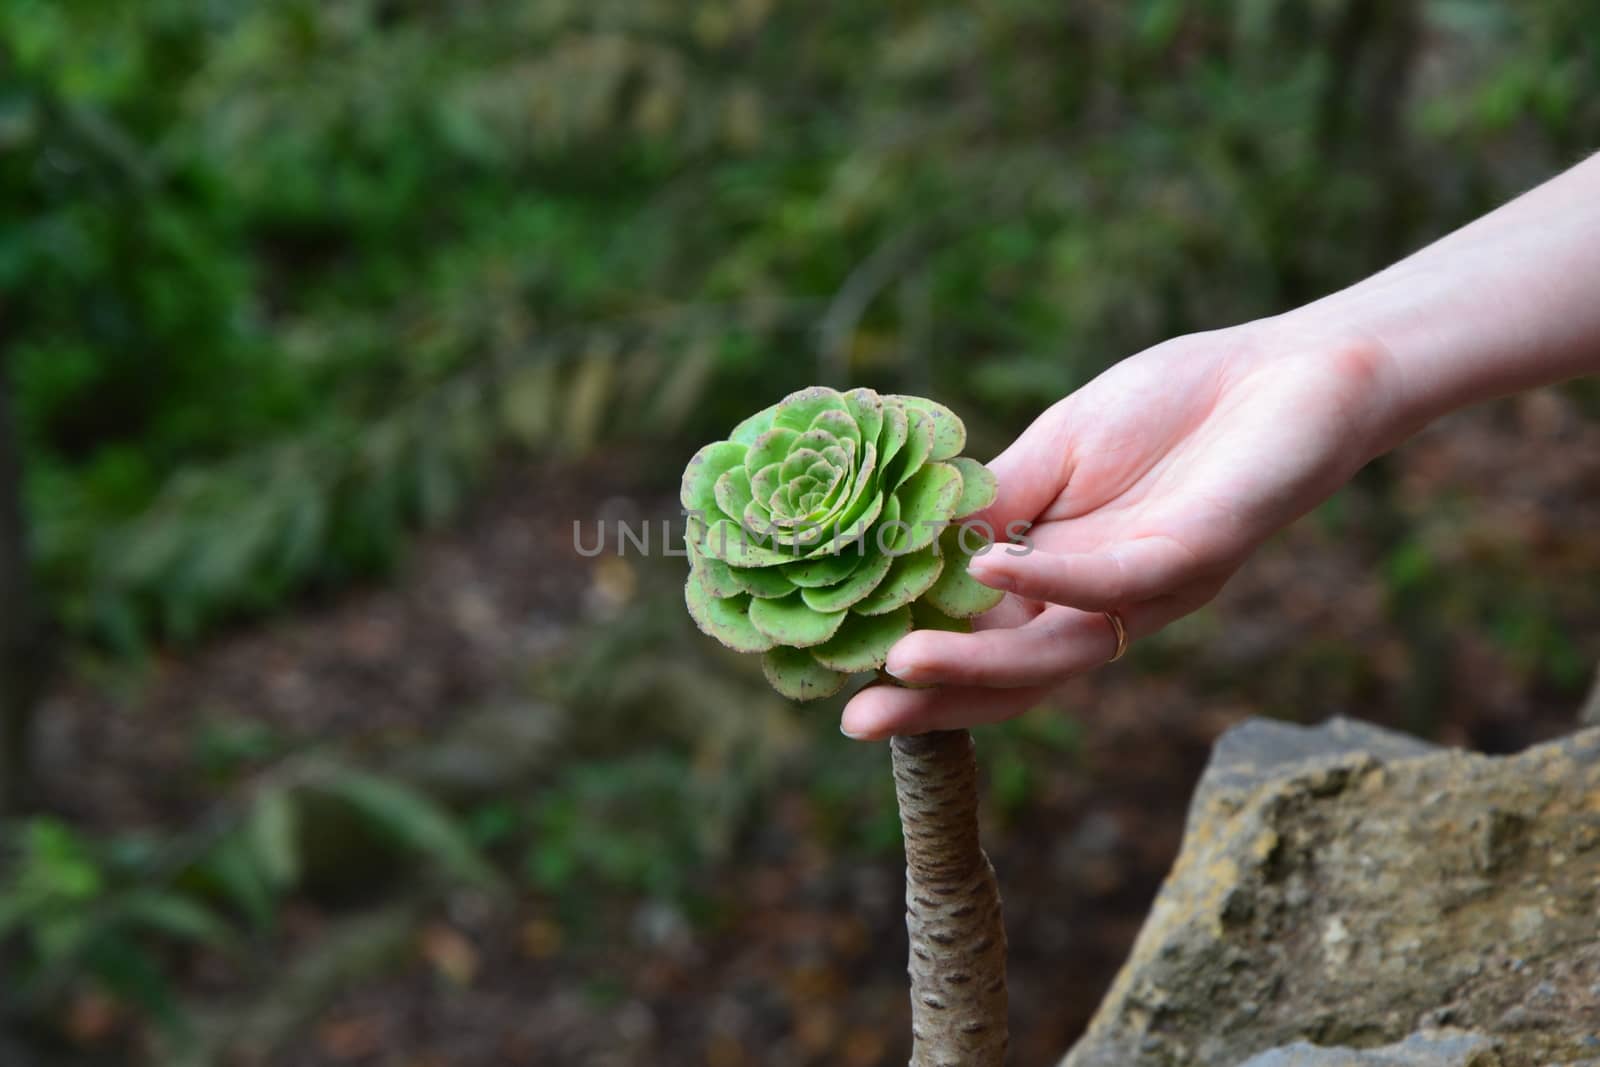 Hand and green wood rose by ruv86